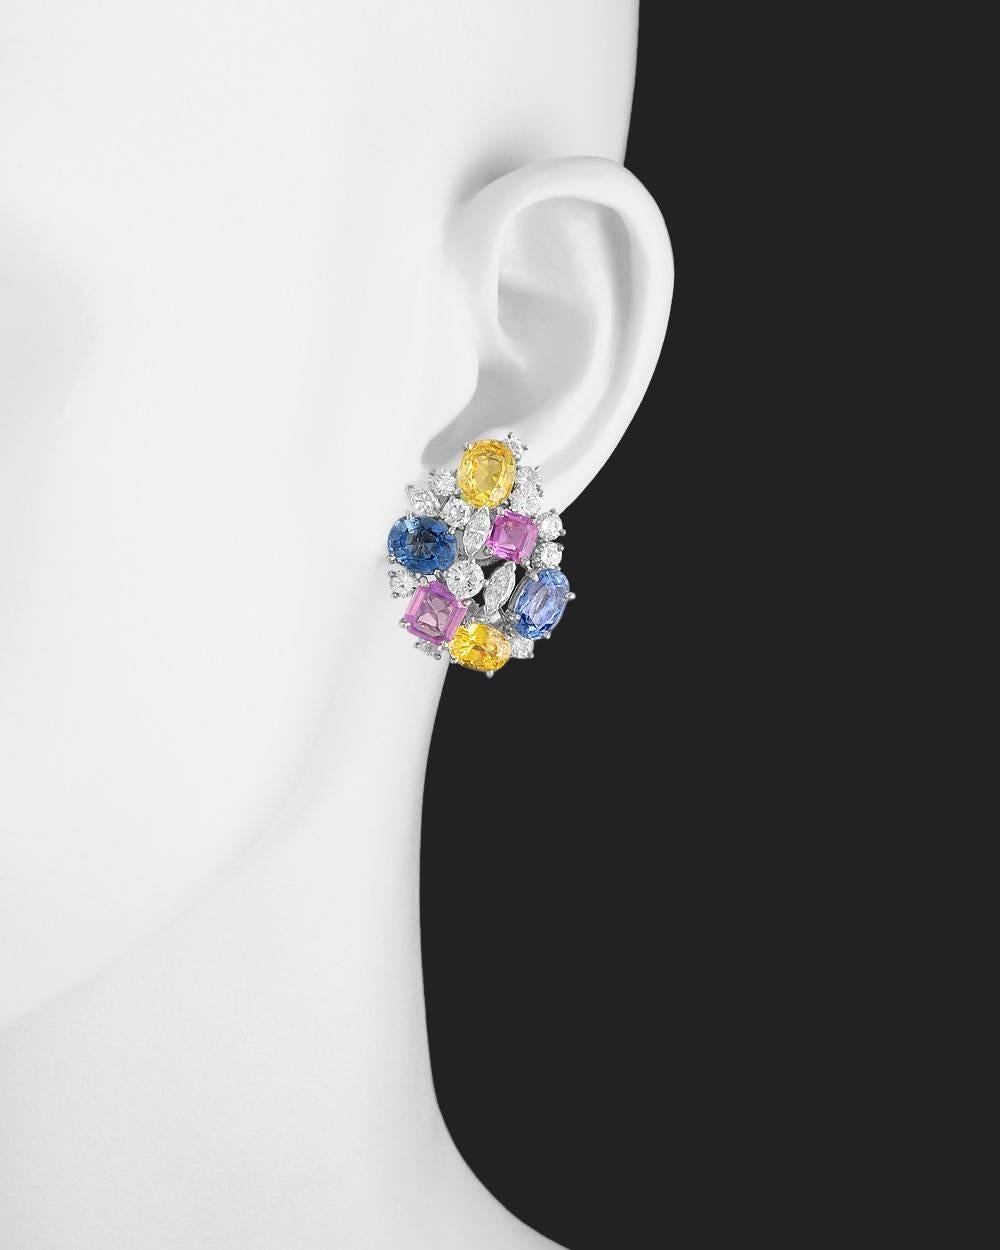 Multicolored sapphire and diamond cluster earrings, showcasing oval-shaped blue and yellow sapphires, as well as emerald-cut pink sapphires, accented by round brilliant-cut and marquise-shaped diamonds, mounted in platinum, numbered 701247 and